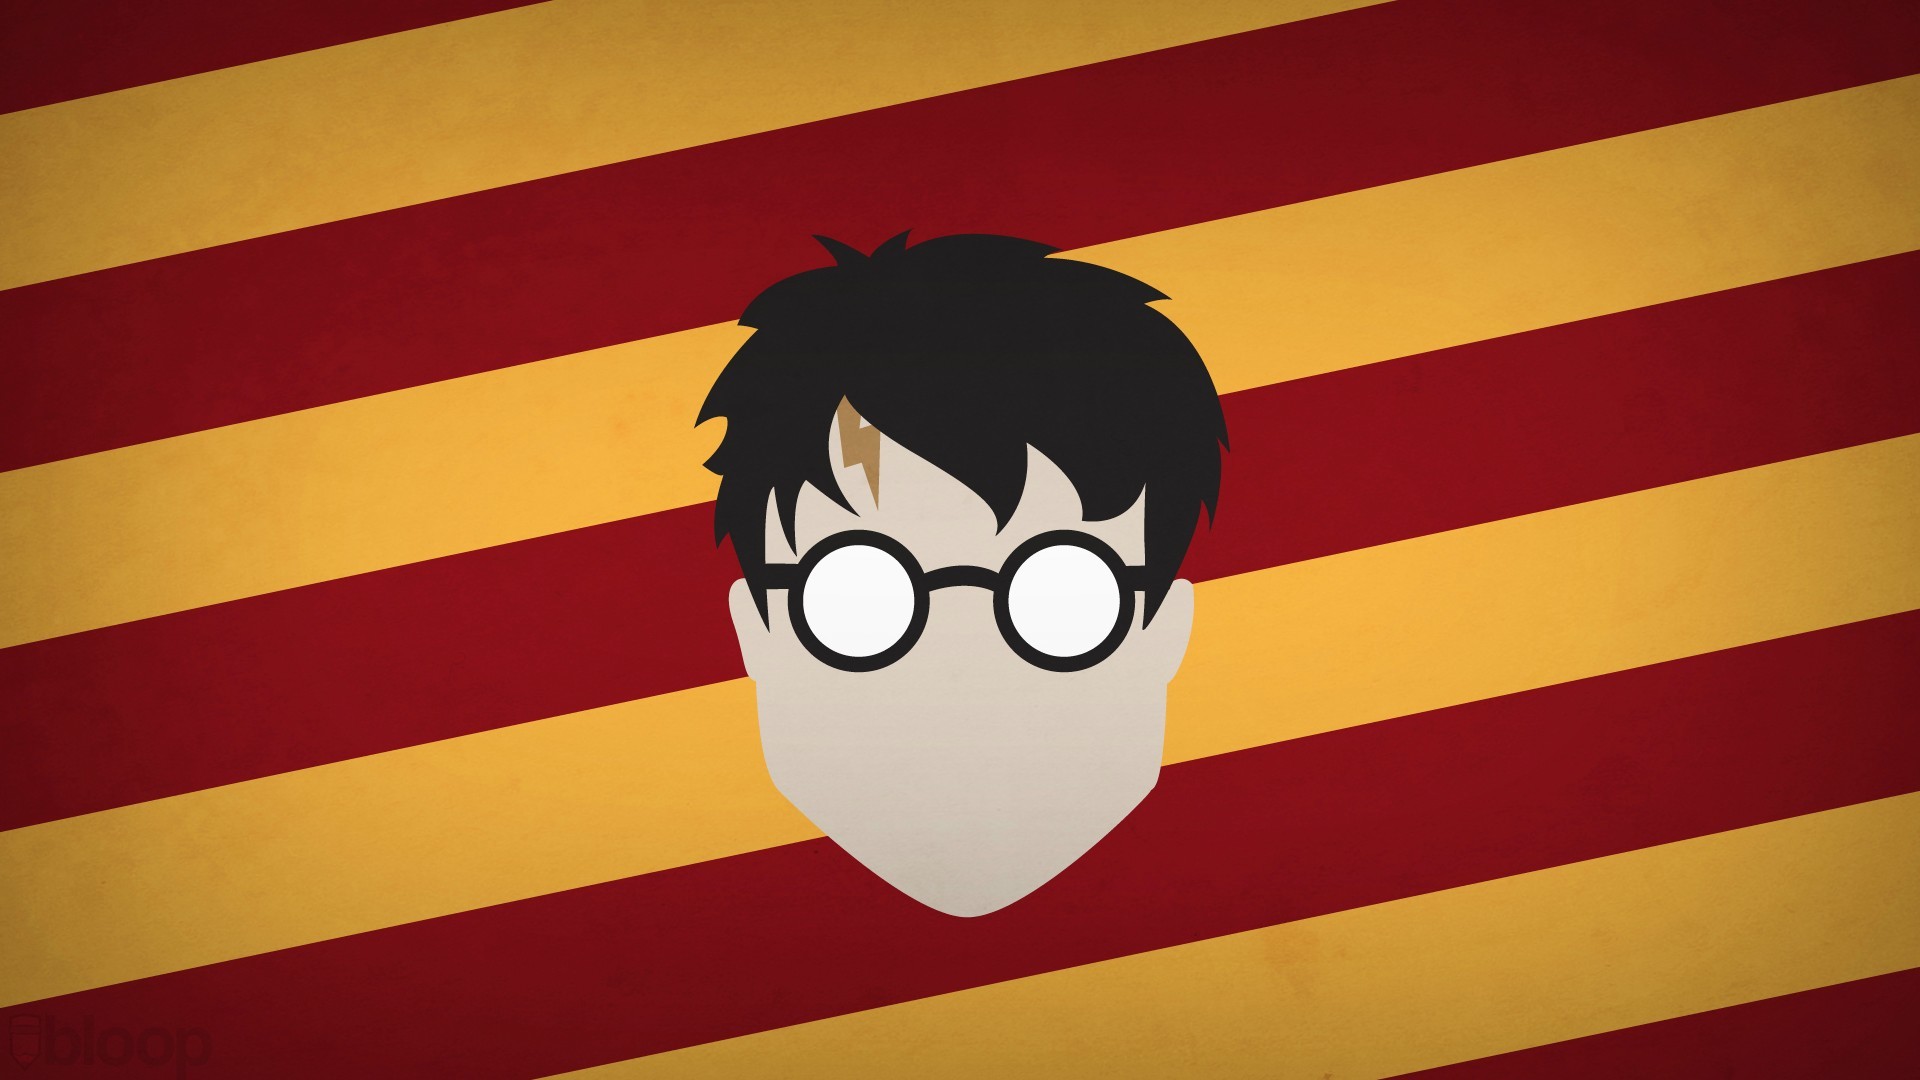 1920x1080 Explore Harry Potter Cartoon and more! Wallpapers!